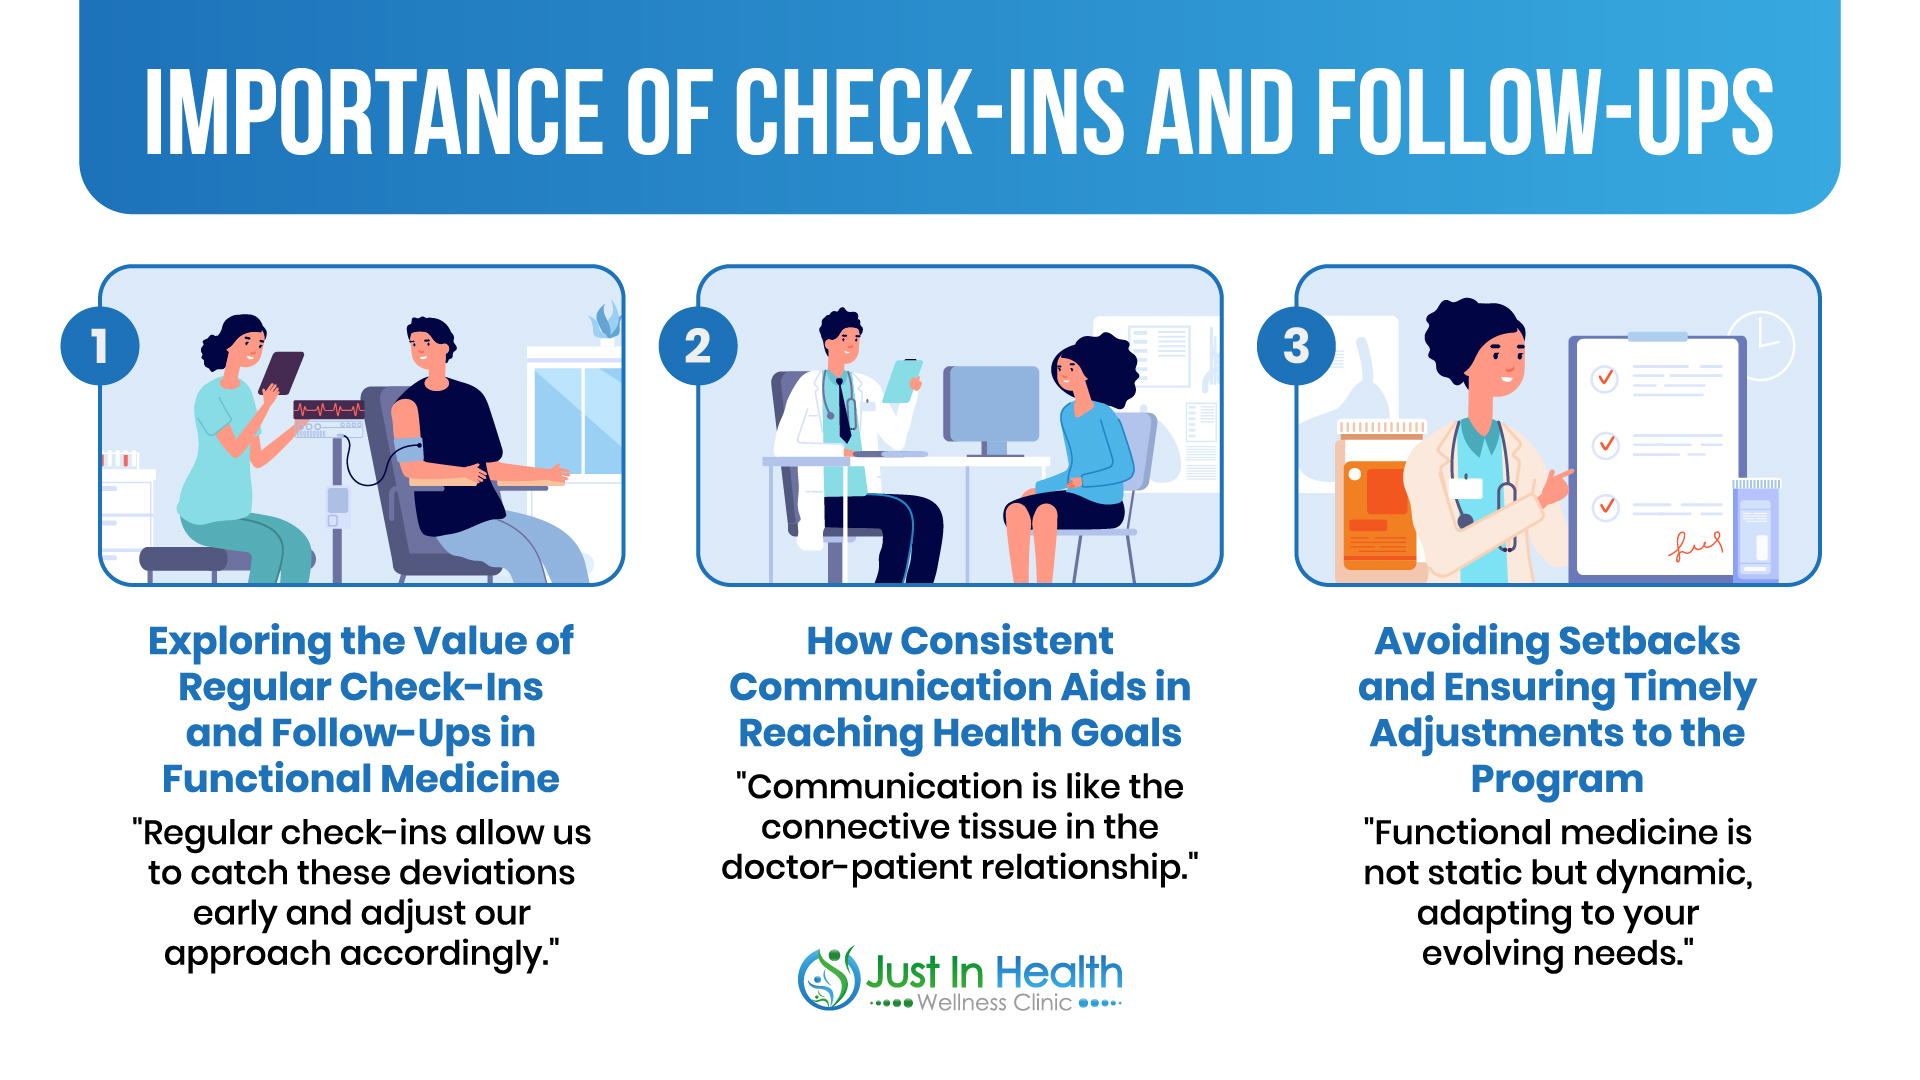 The Importance of Check-Ins and Follow Ups_Dr. Justin Marchegiani